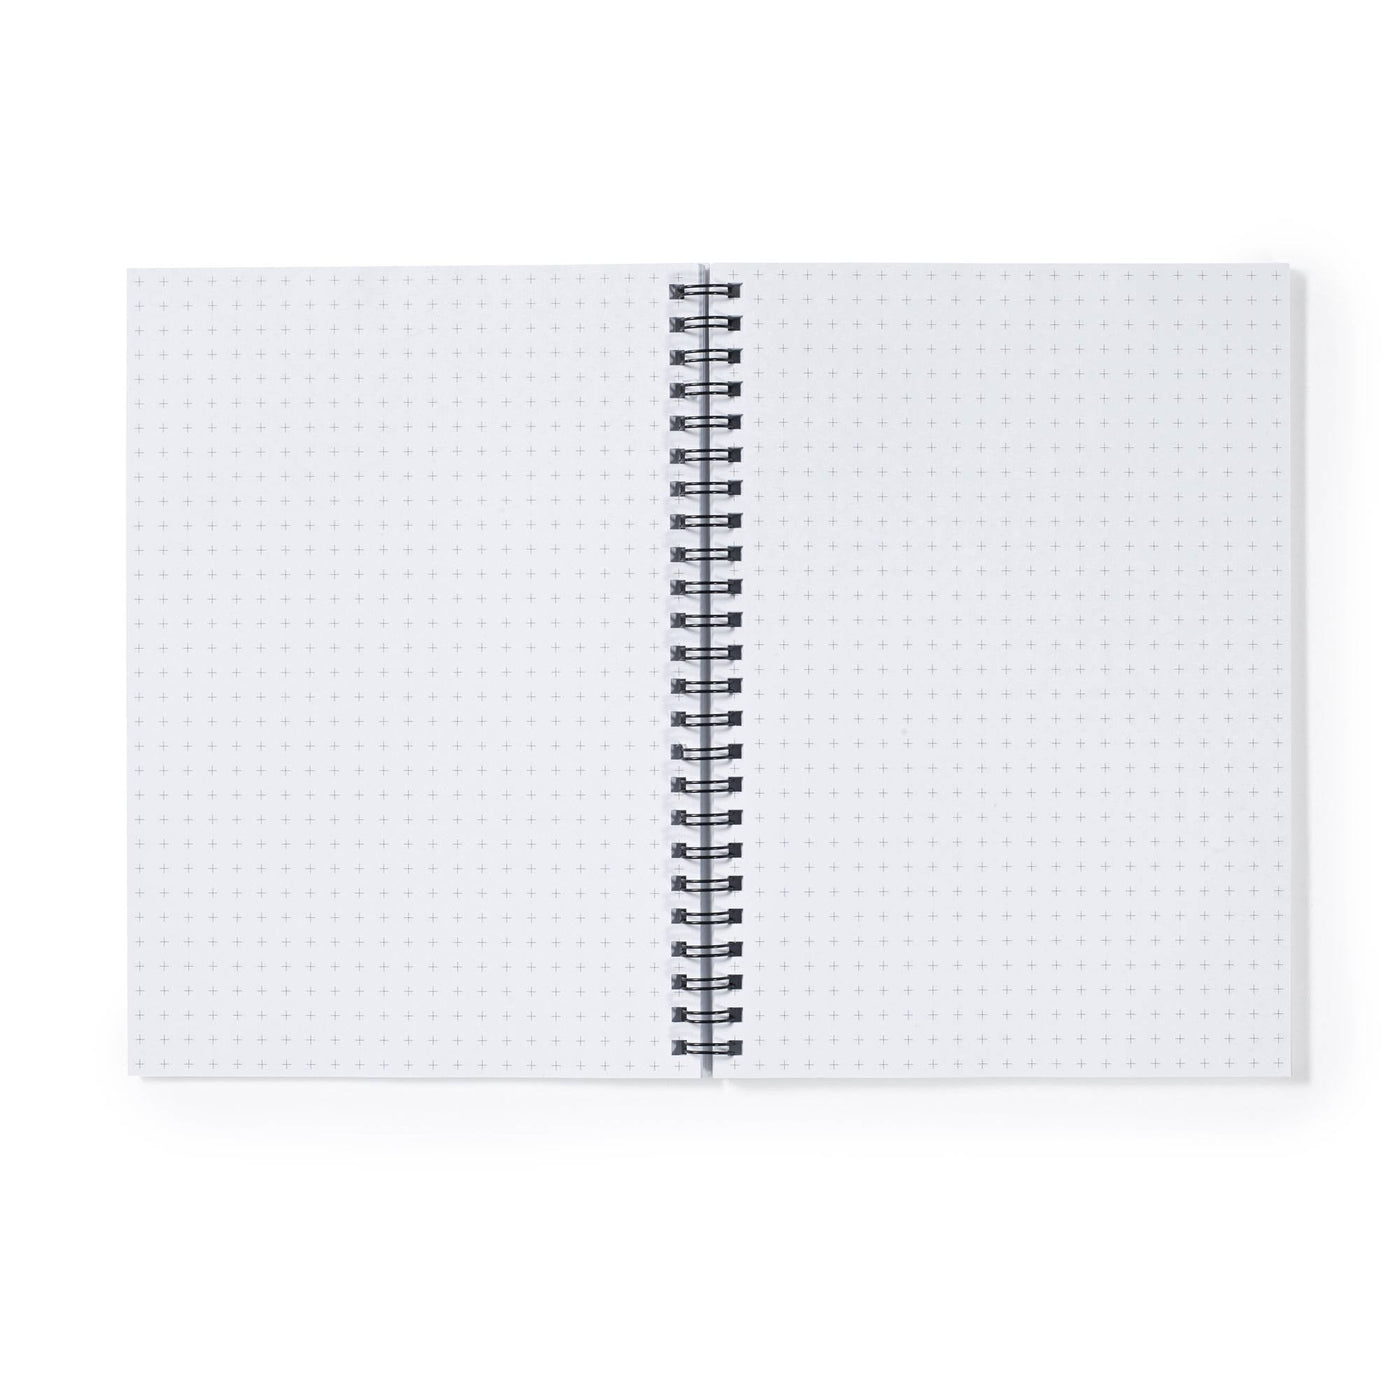 Personalised Notebook - "Recipes & Shopping Lists"